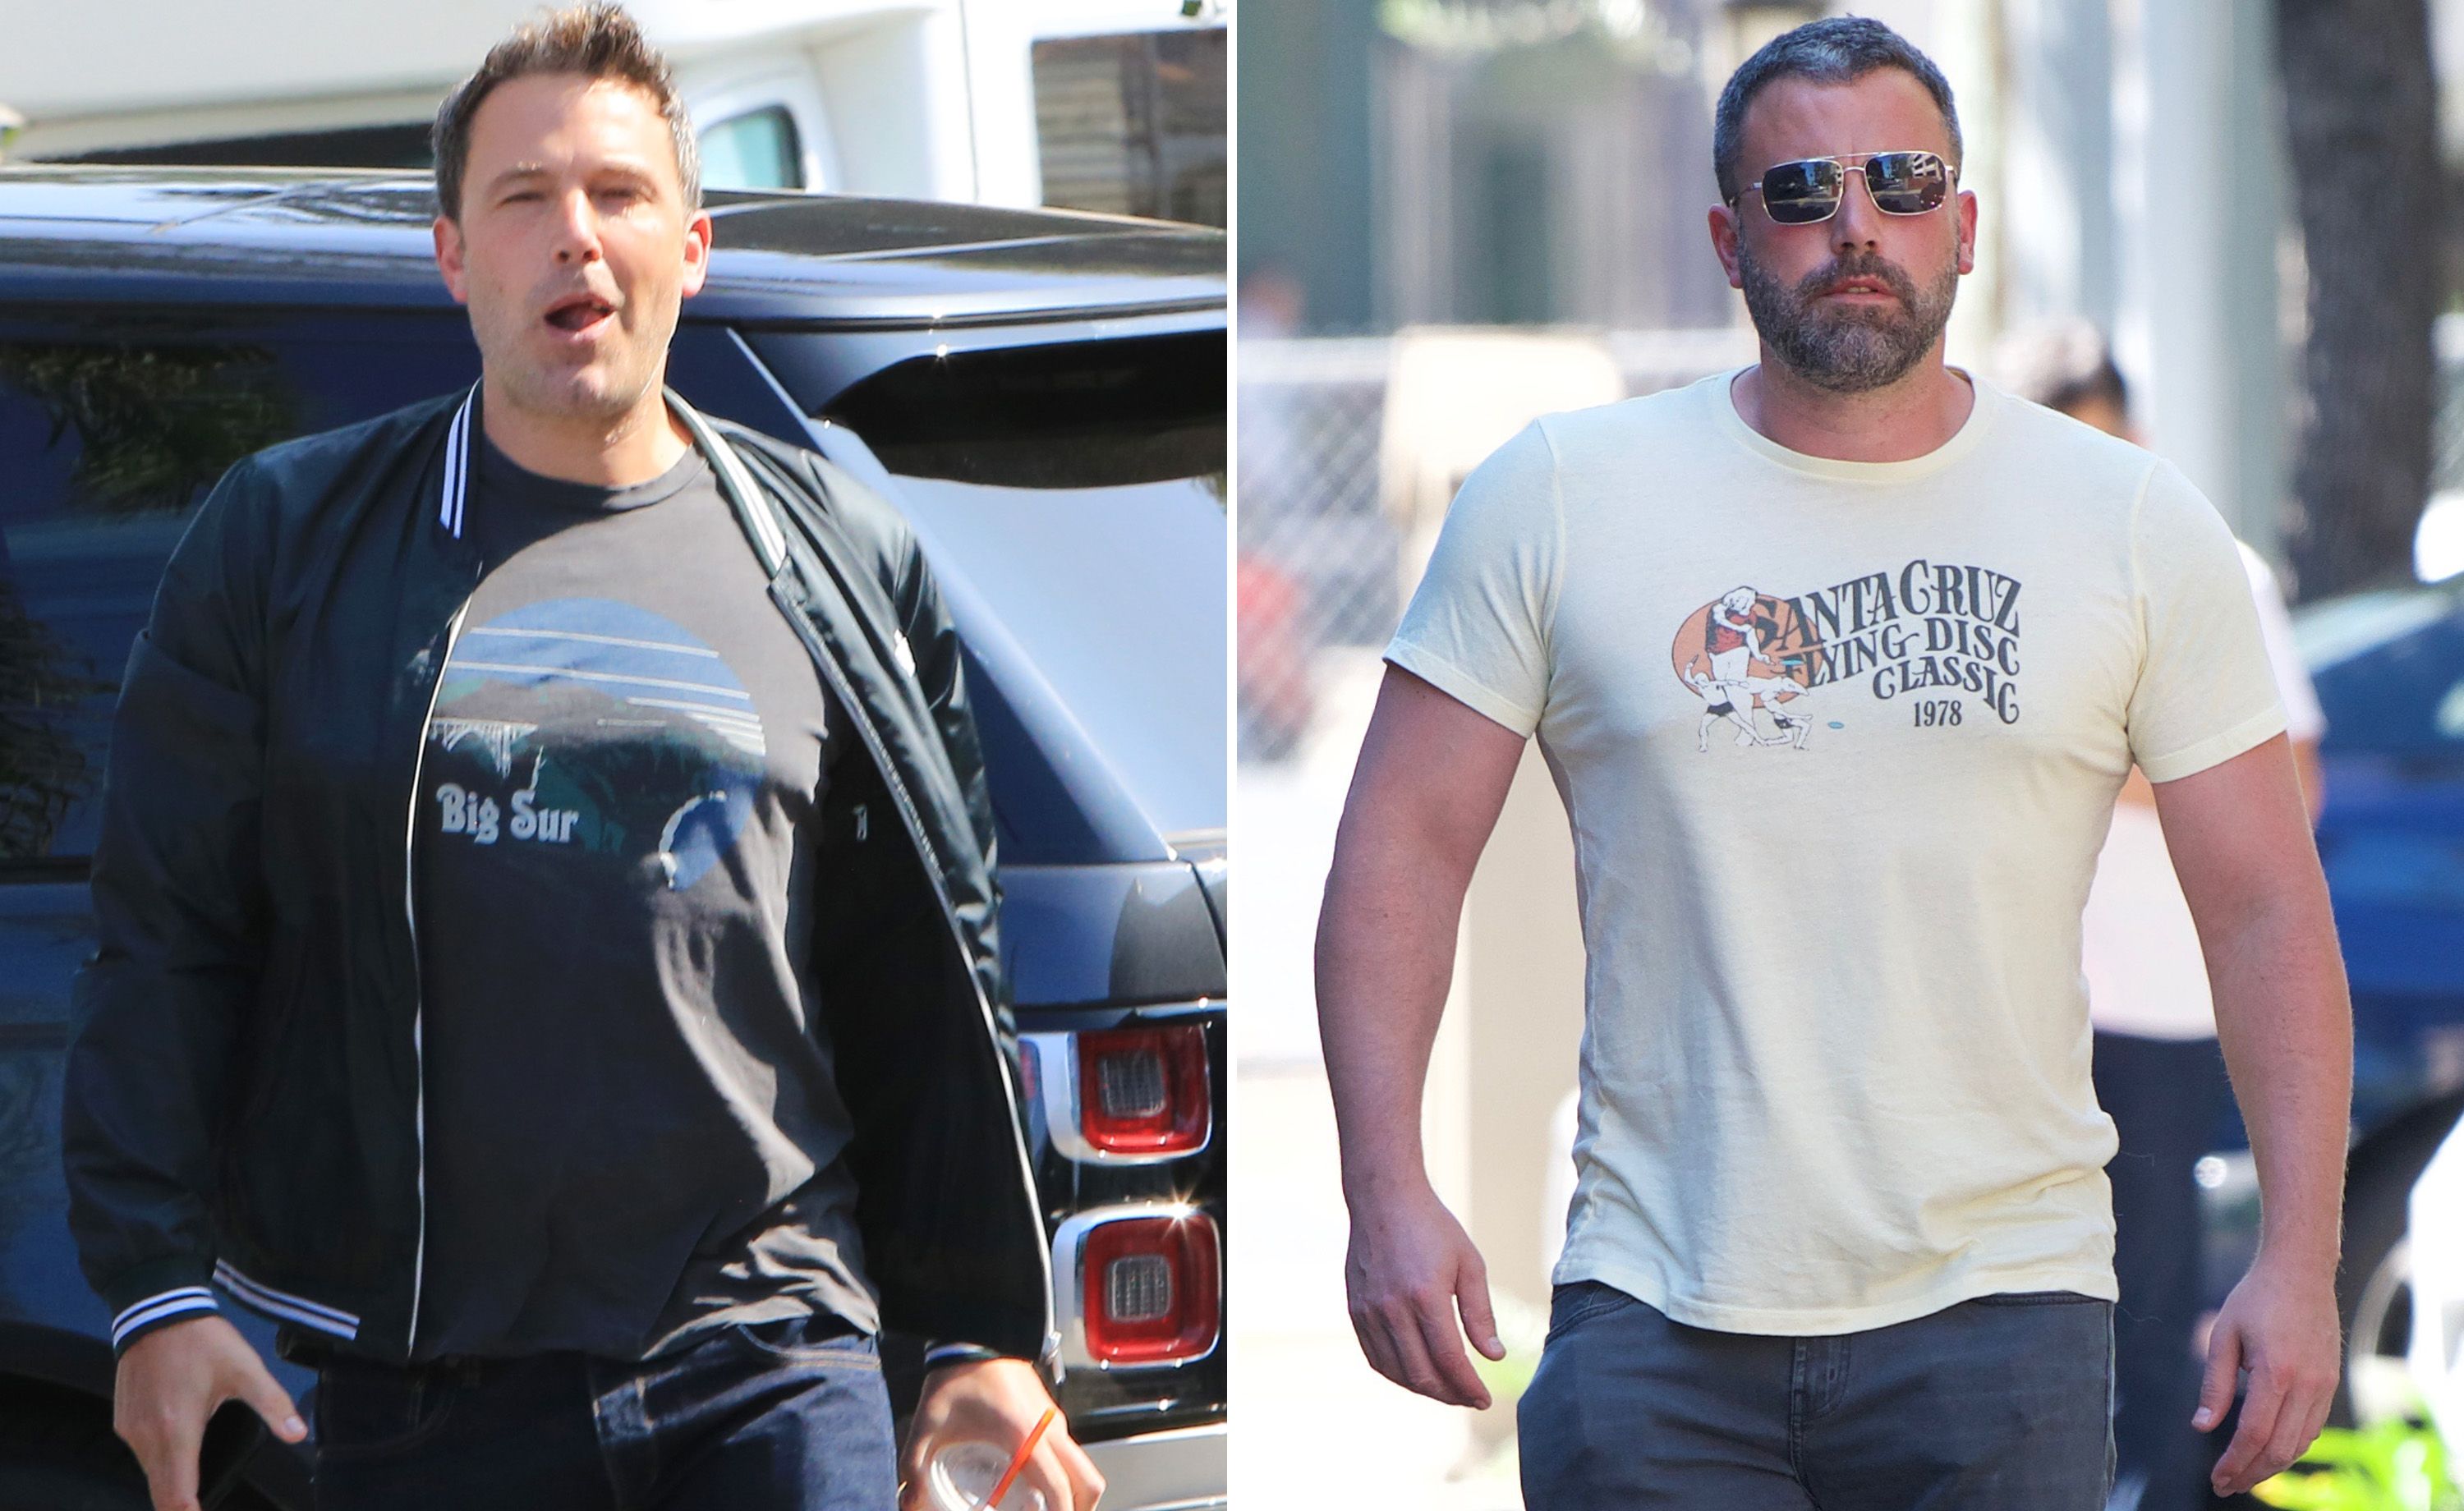 Batman S Ben Affleck Is Looking Super Ripped Could He Be Training For The Dark Knight S Return